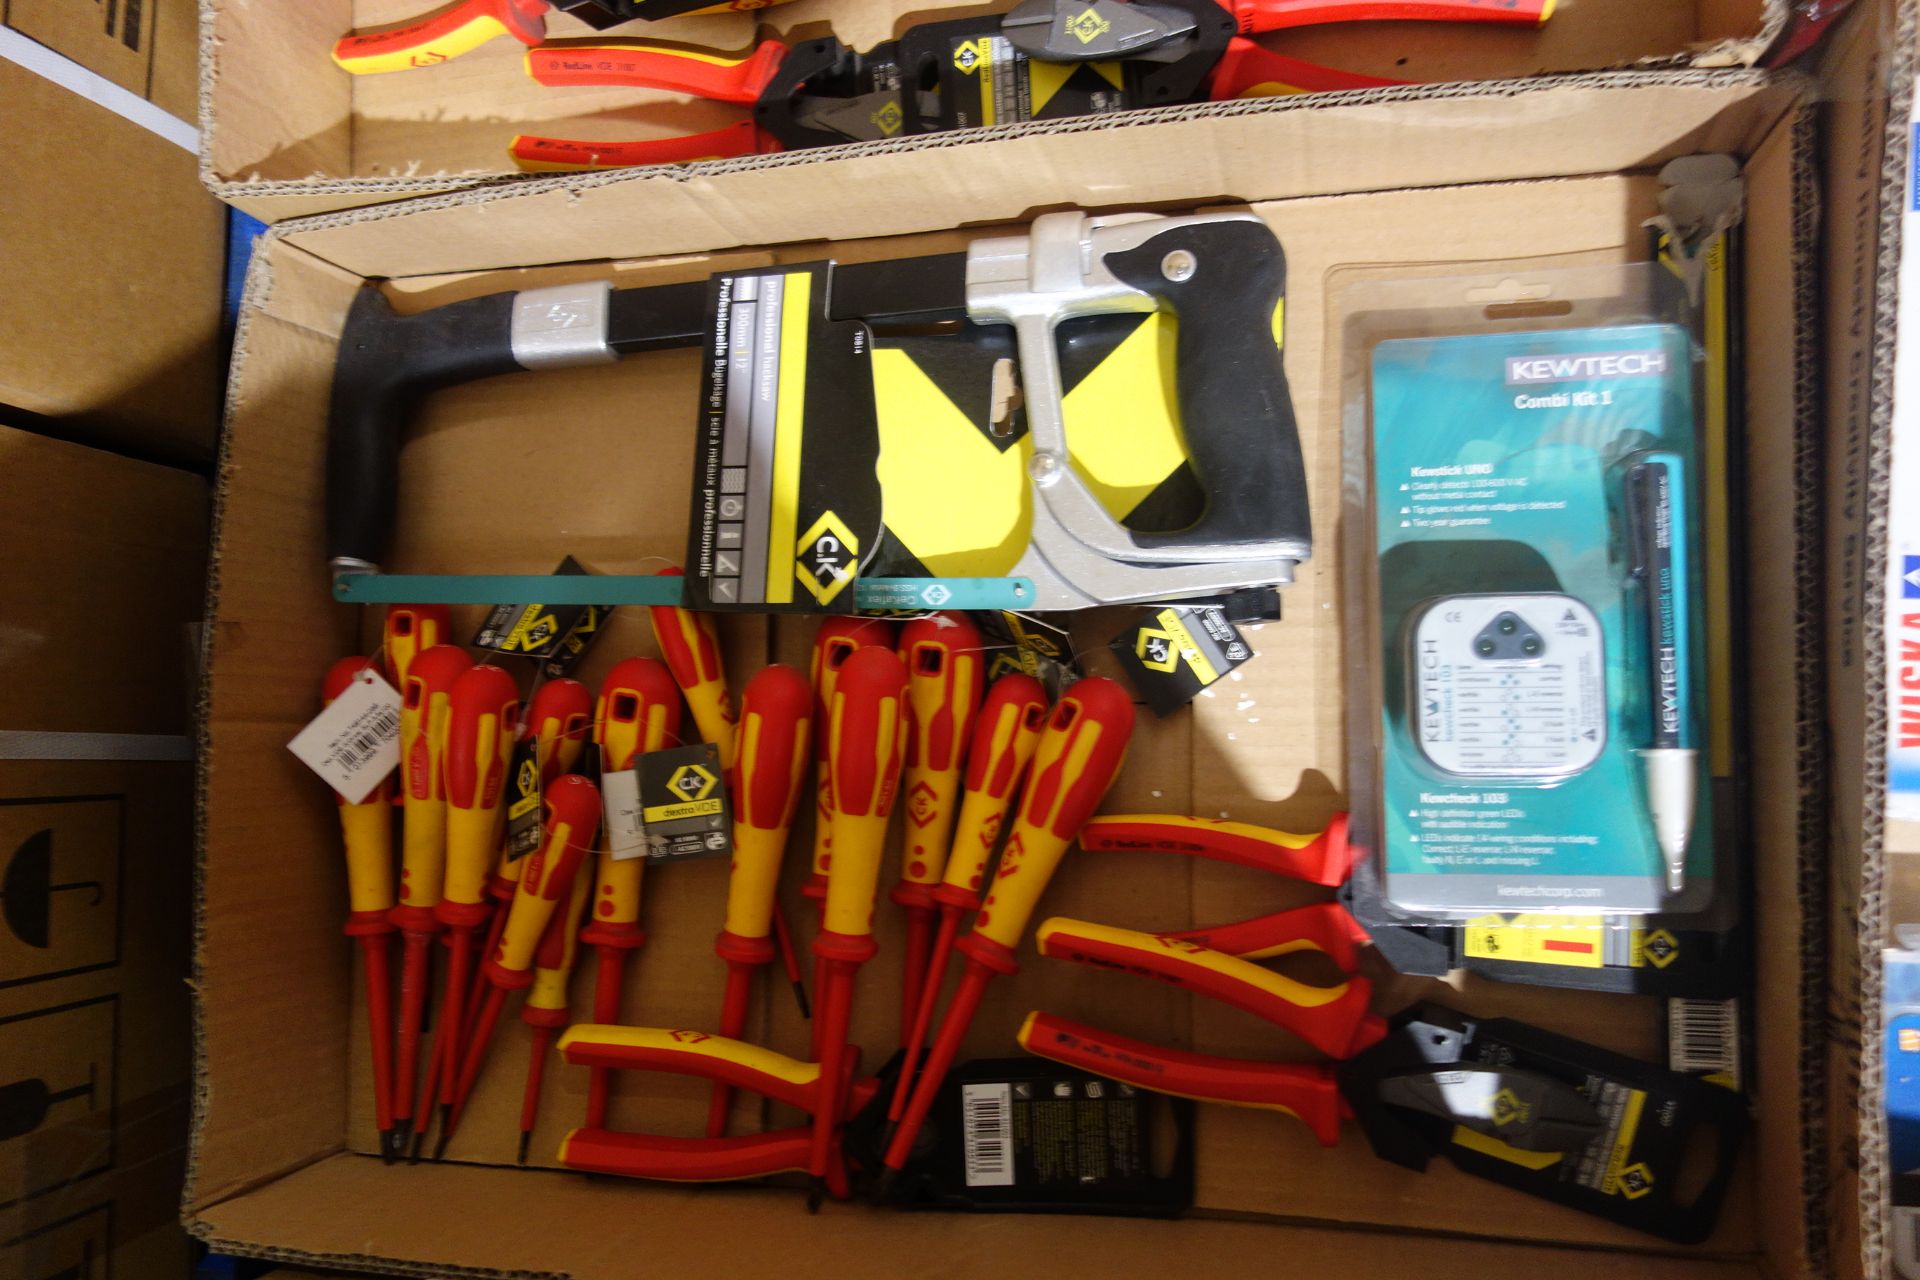 1 X Box Of Mixed Tools INC: Screwdrivers Electrical Testers Hack Saws + More